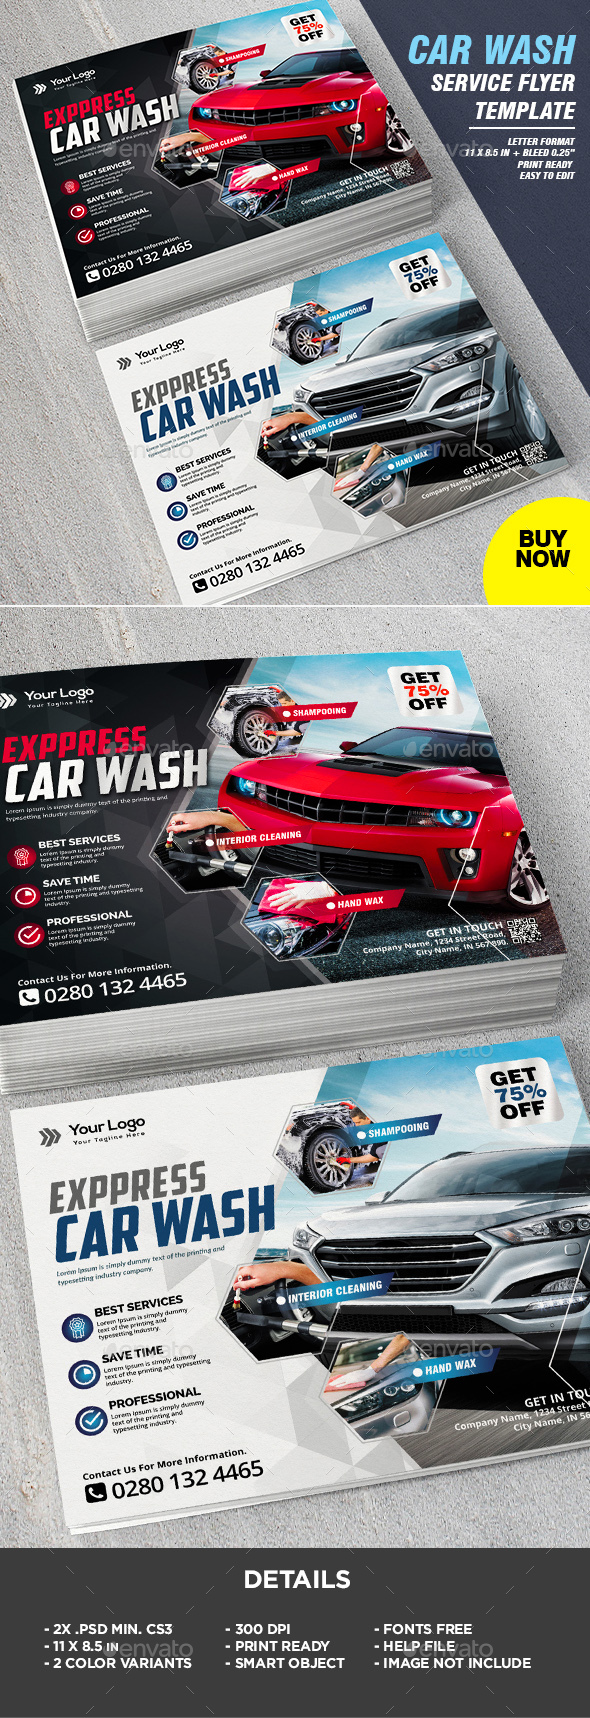 Car Wash Service Business Flyer Template